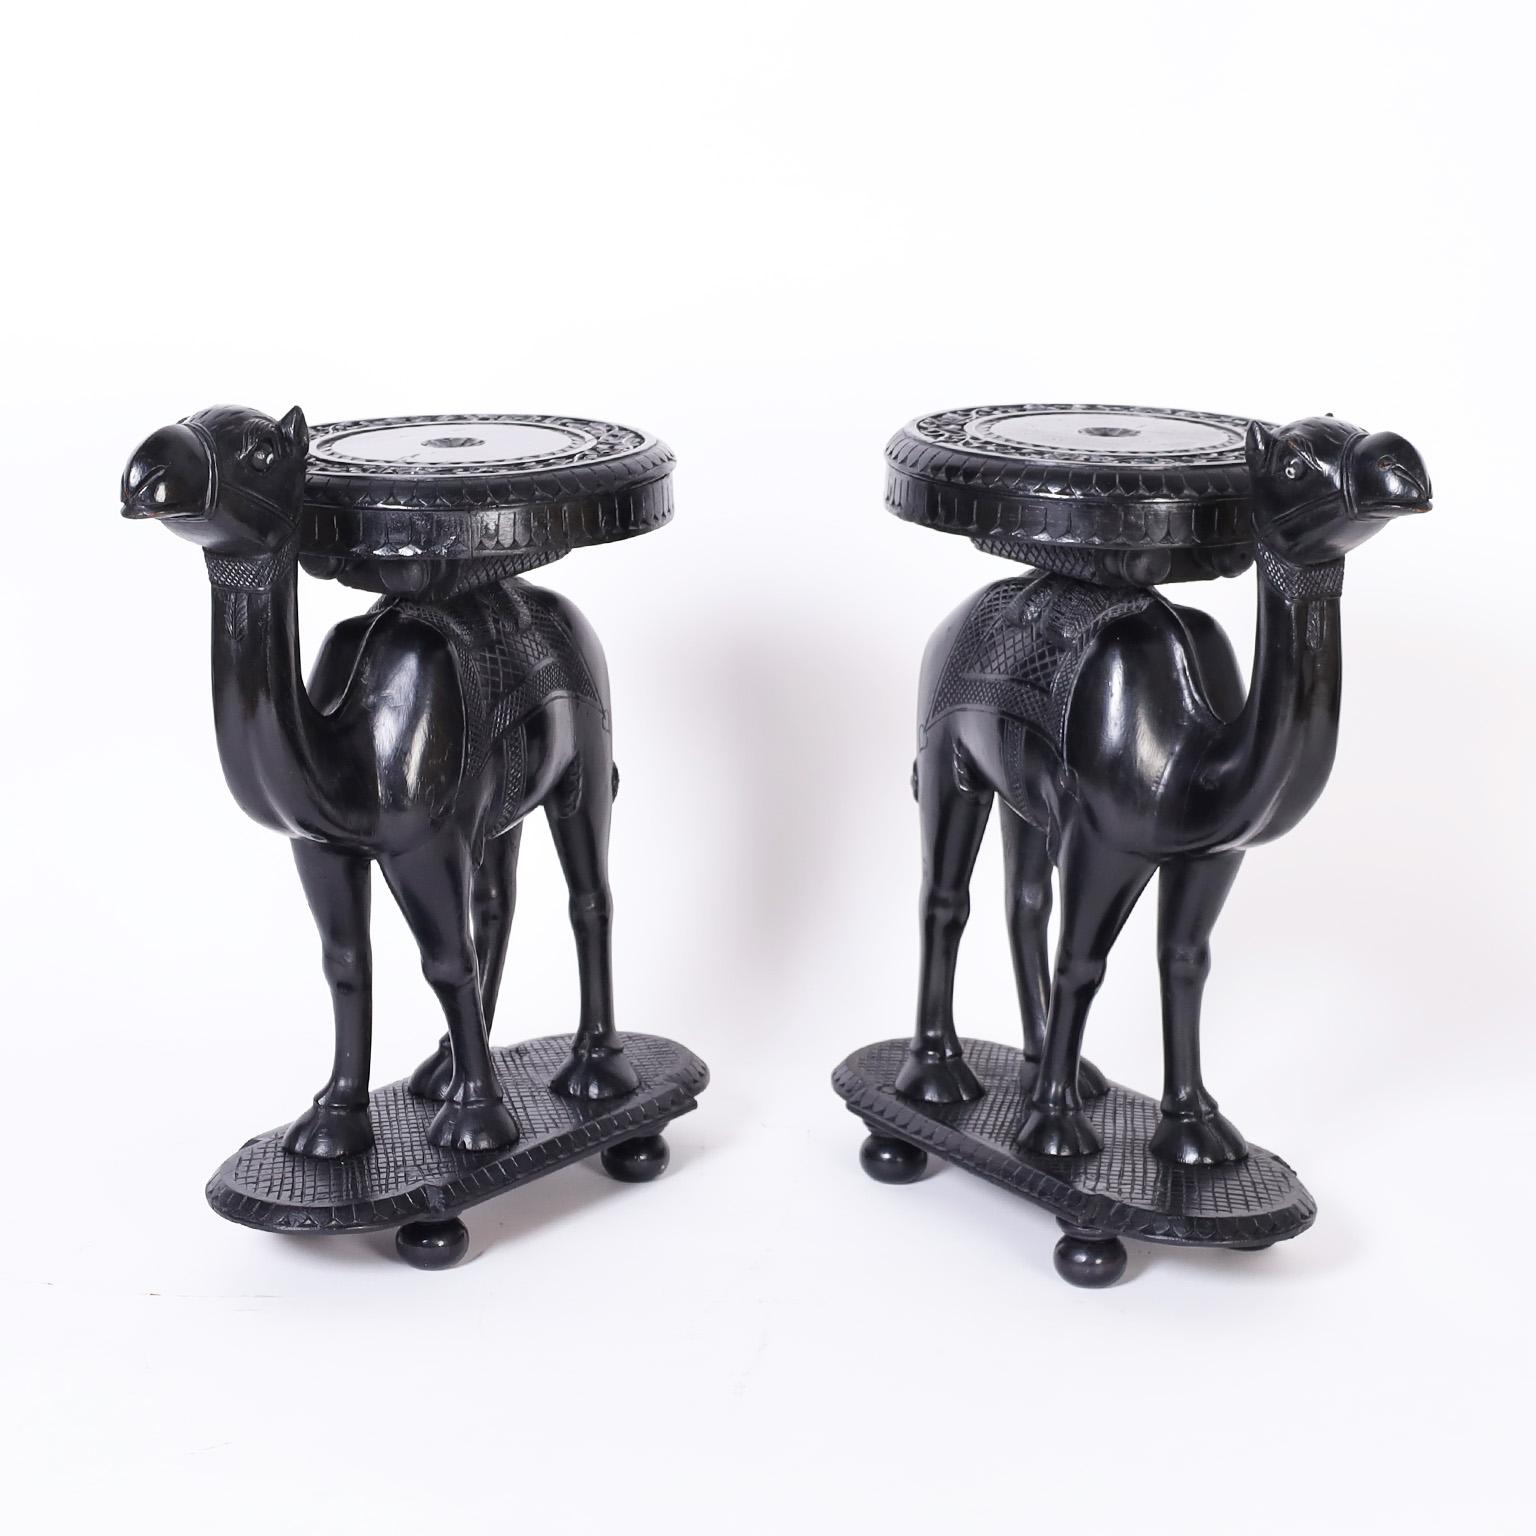 Pair of Anglo Indian camel form stands crafted in mahogany with an ebonized finish featuring round tops with floral carvings over expertly carved camels on bases with ball feet.